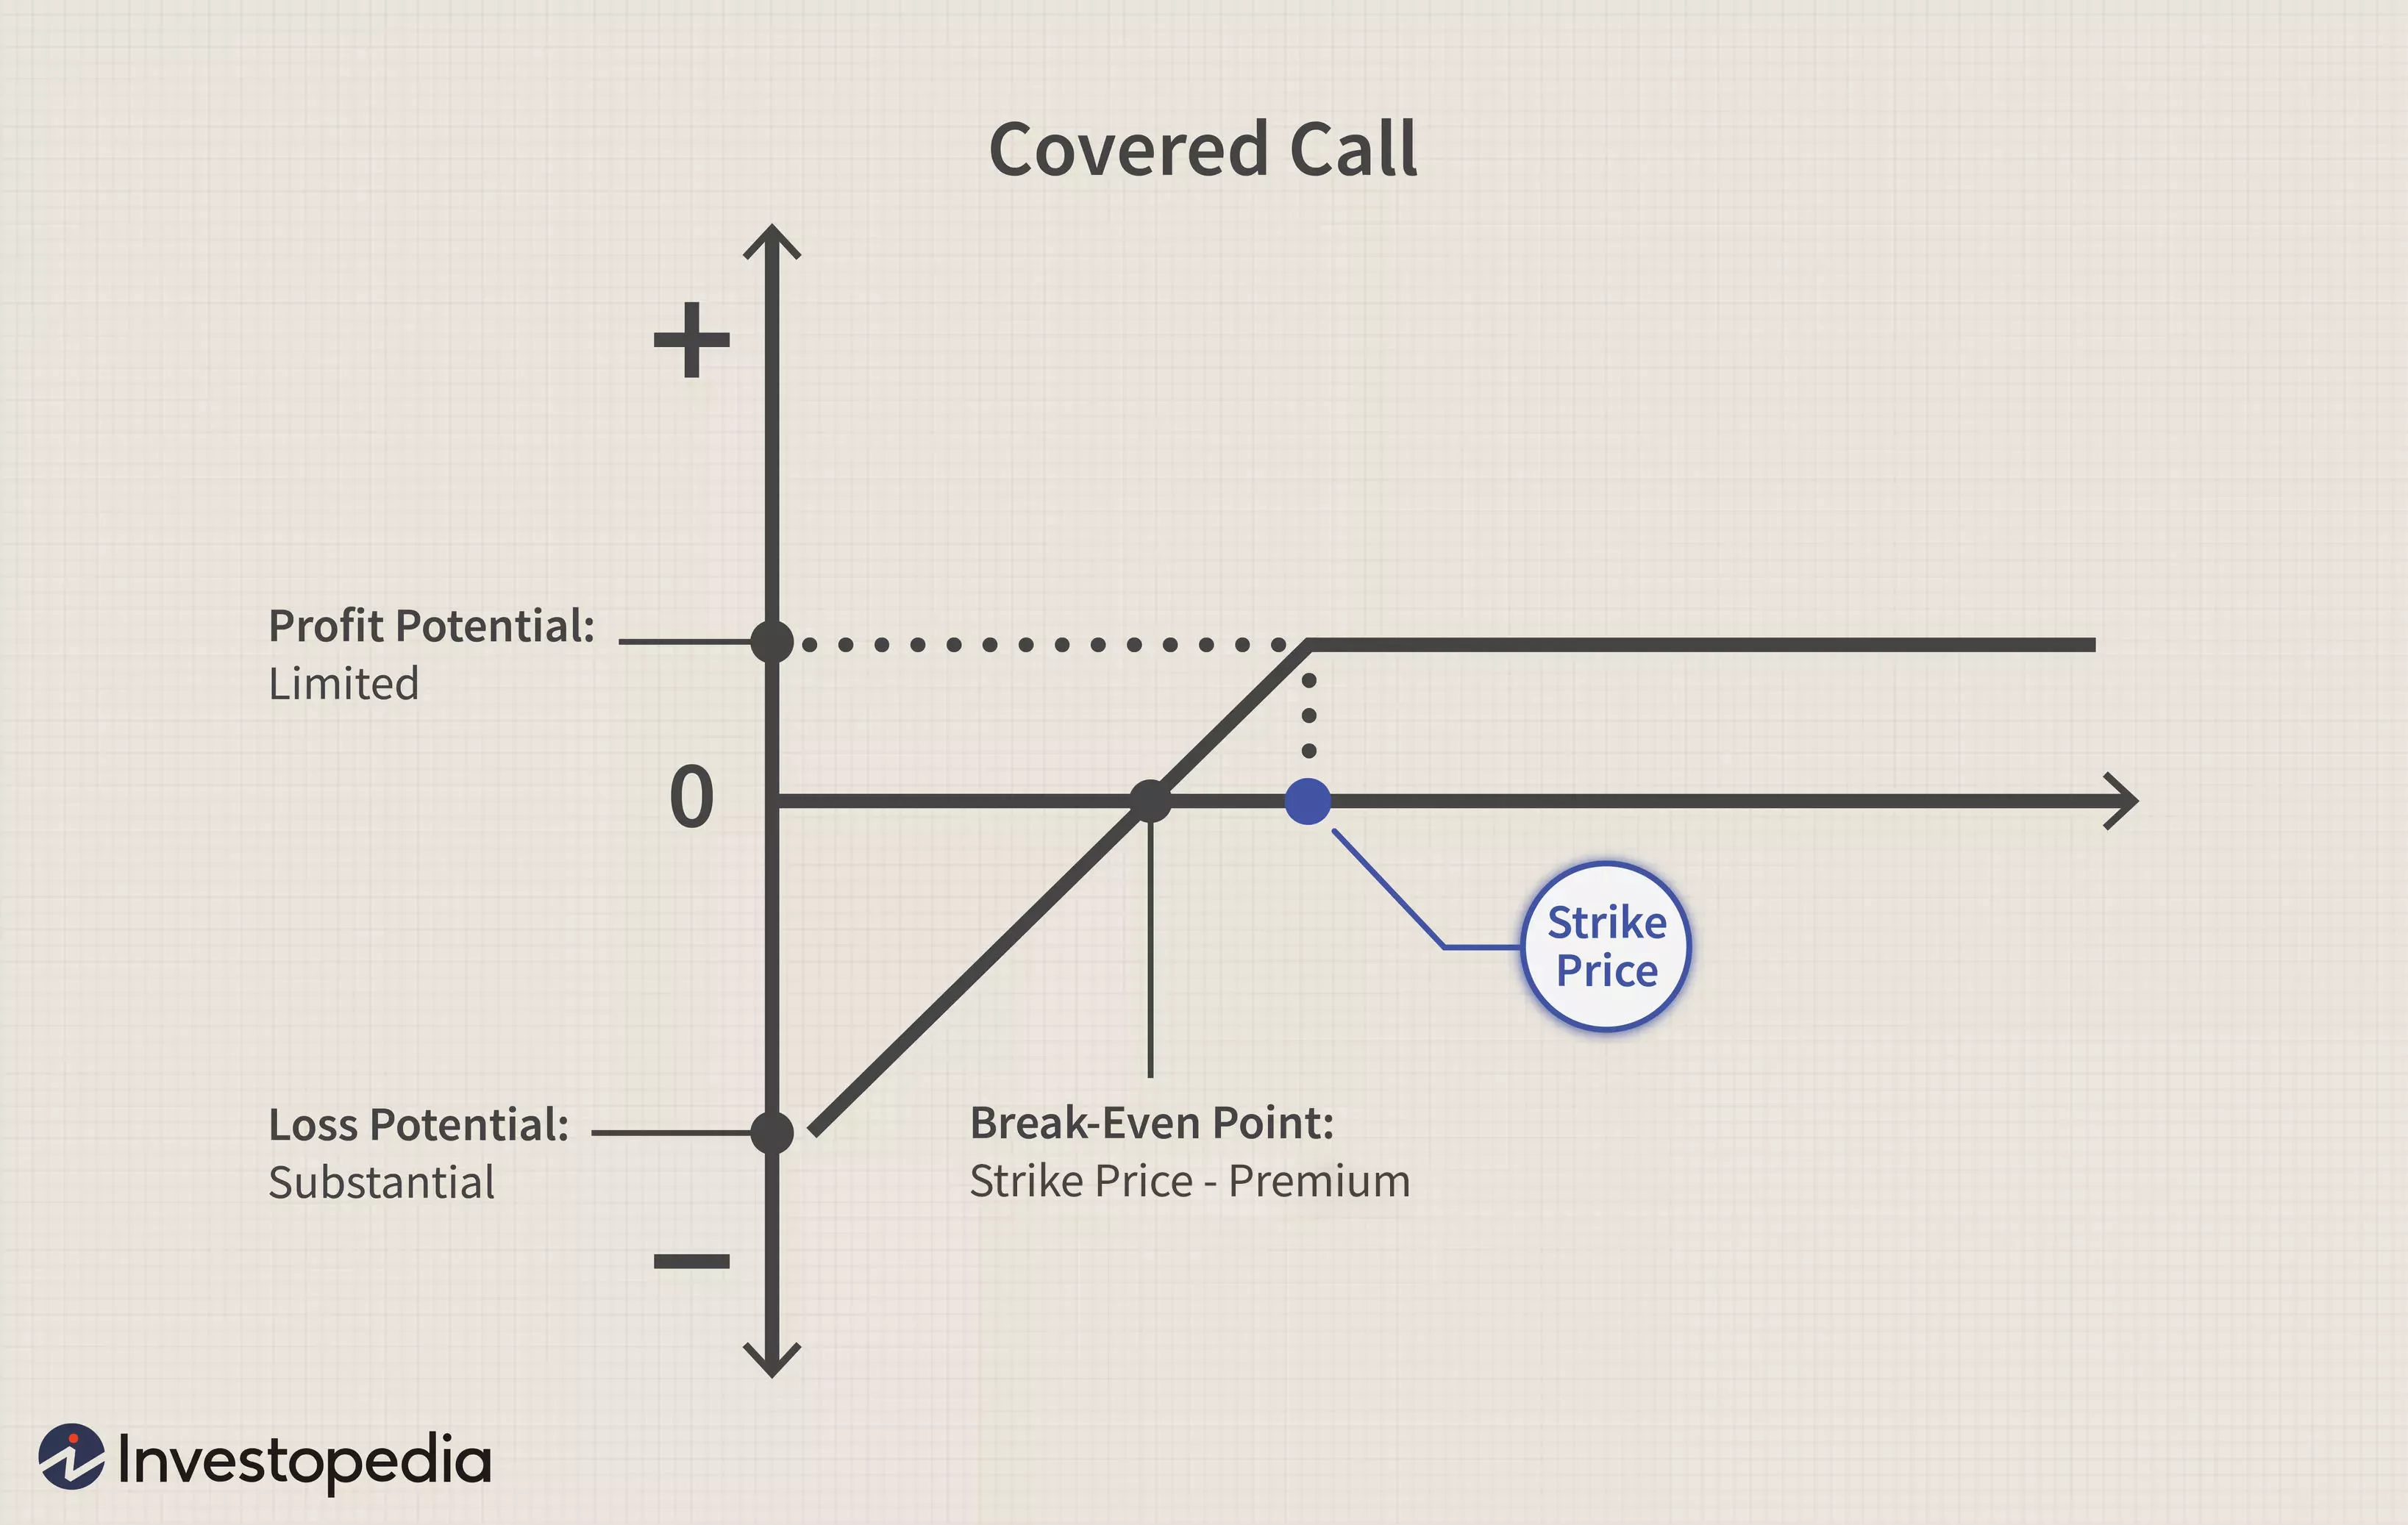 Selling a covered call has a same payoff structure as being outright short a put option